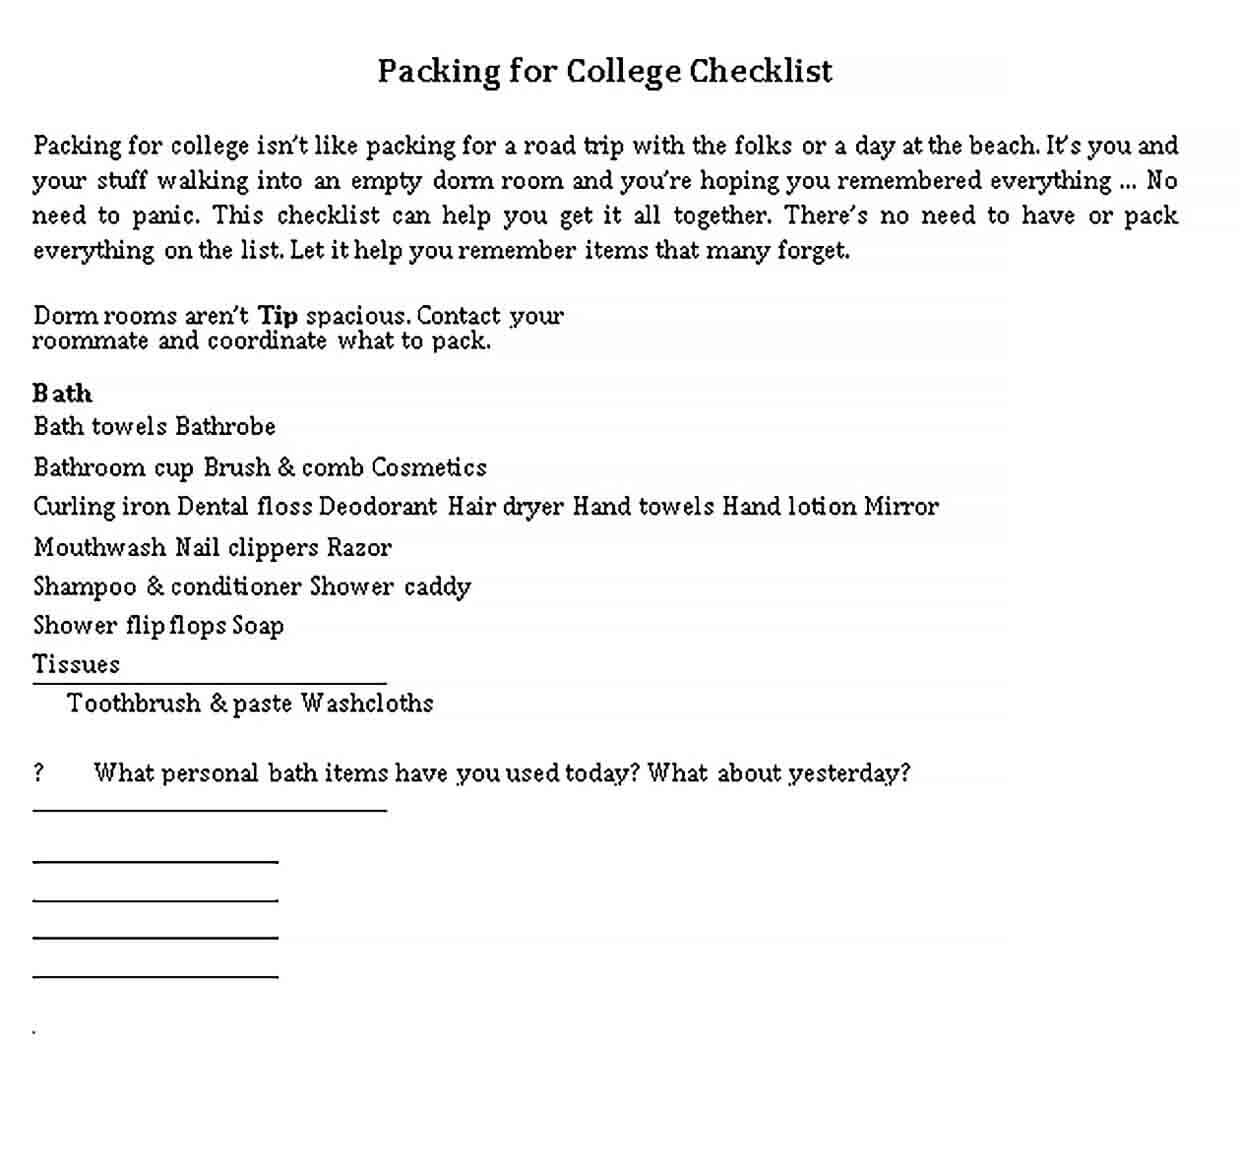 Sample College Packing Checklist 2